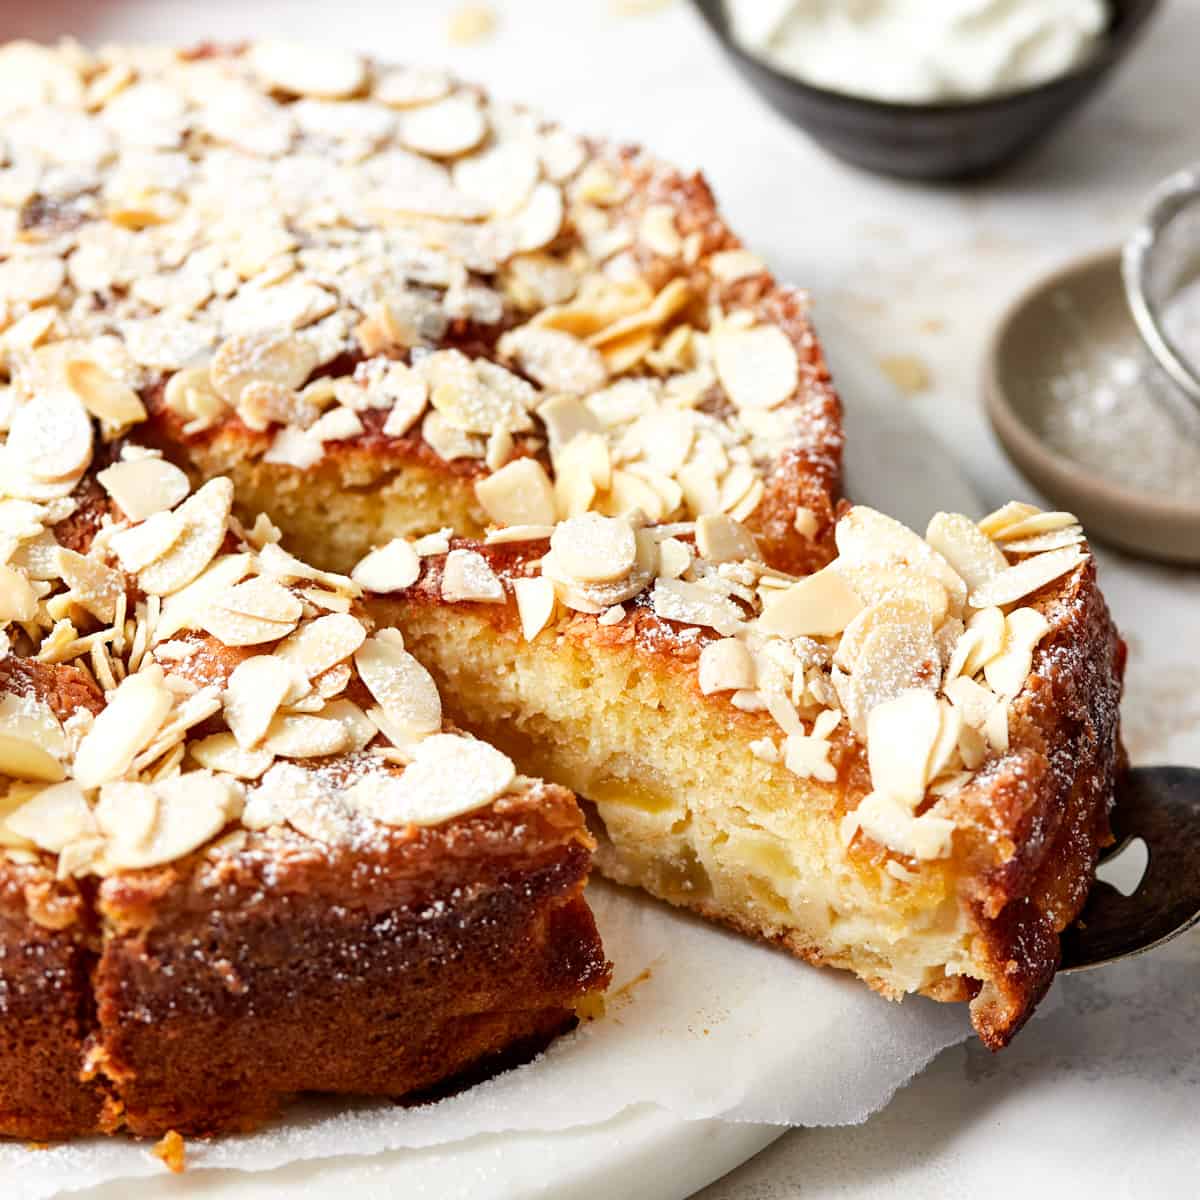 Happy Home Baking: French Almond Cake